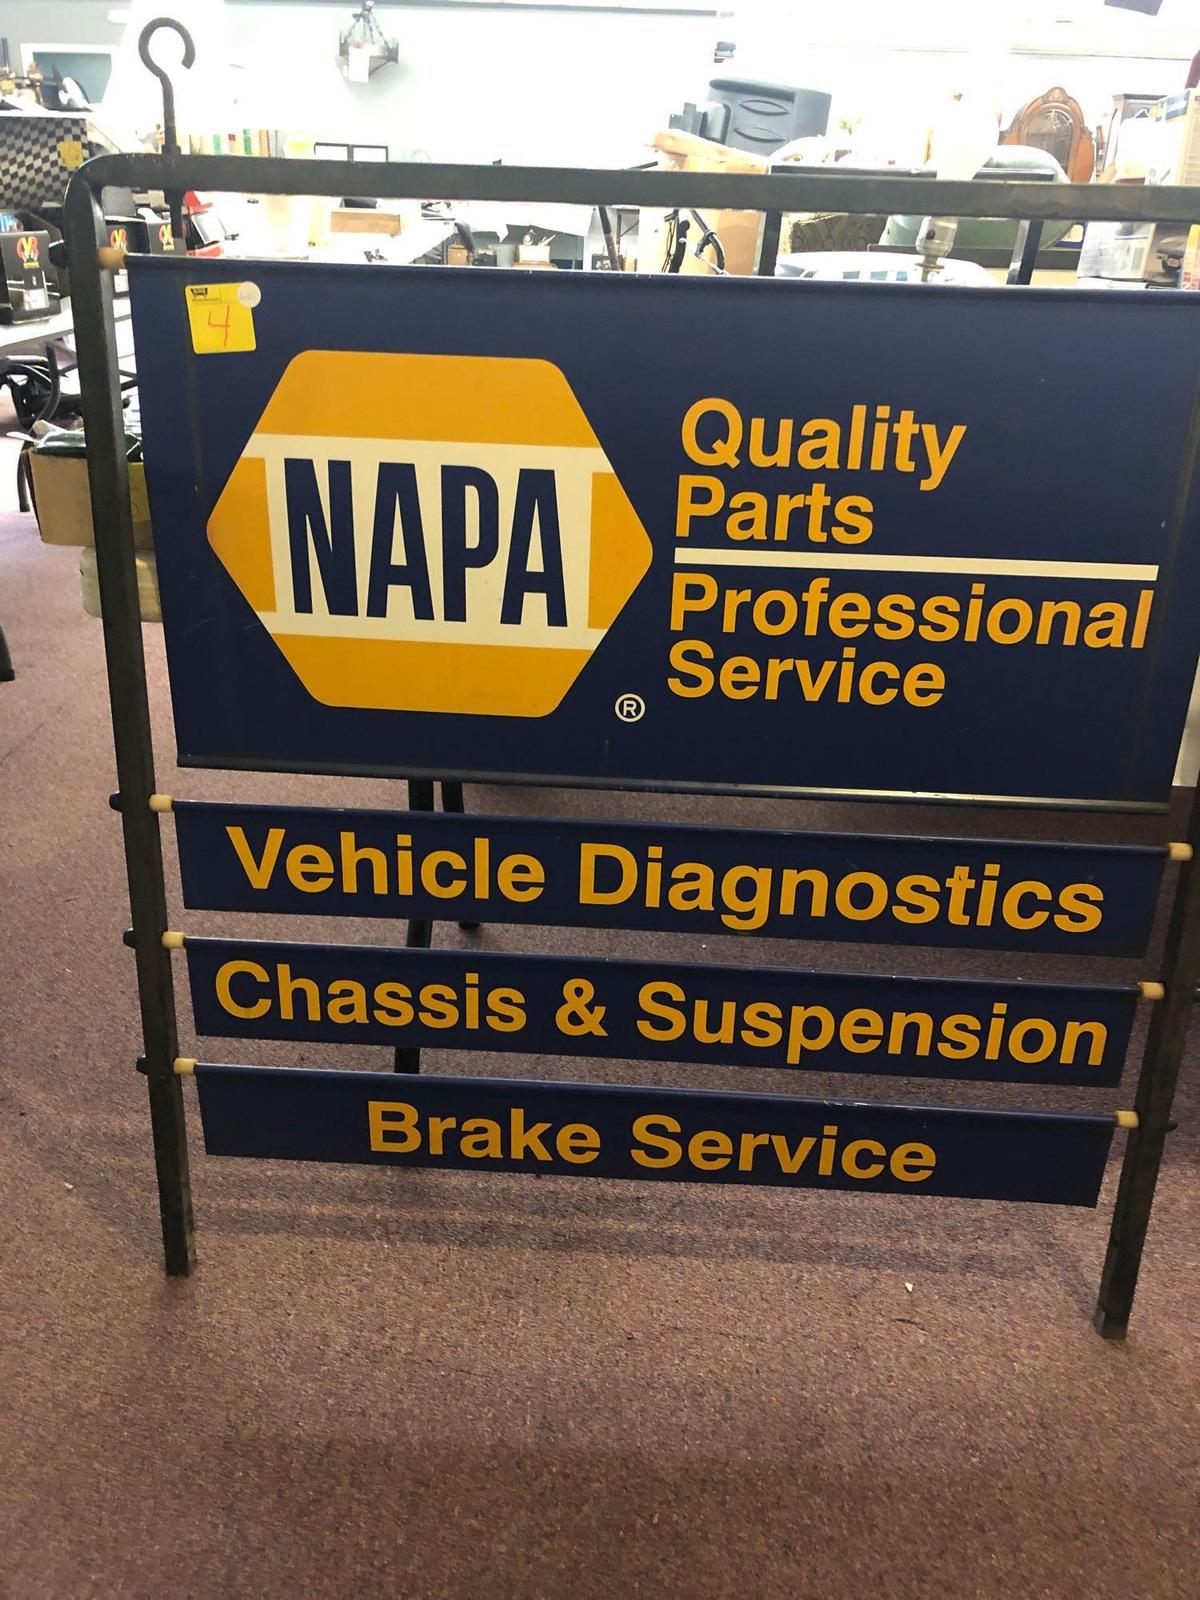 NAPA Quality Parts Professional Service advertisement sign 42 inches